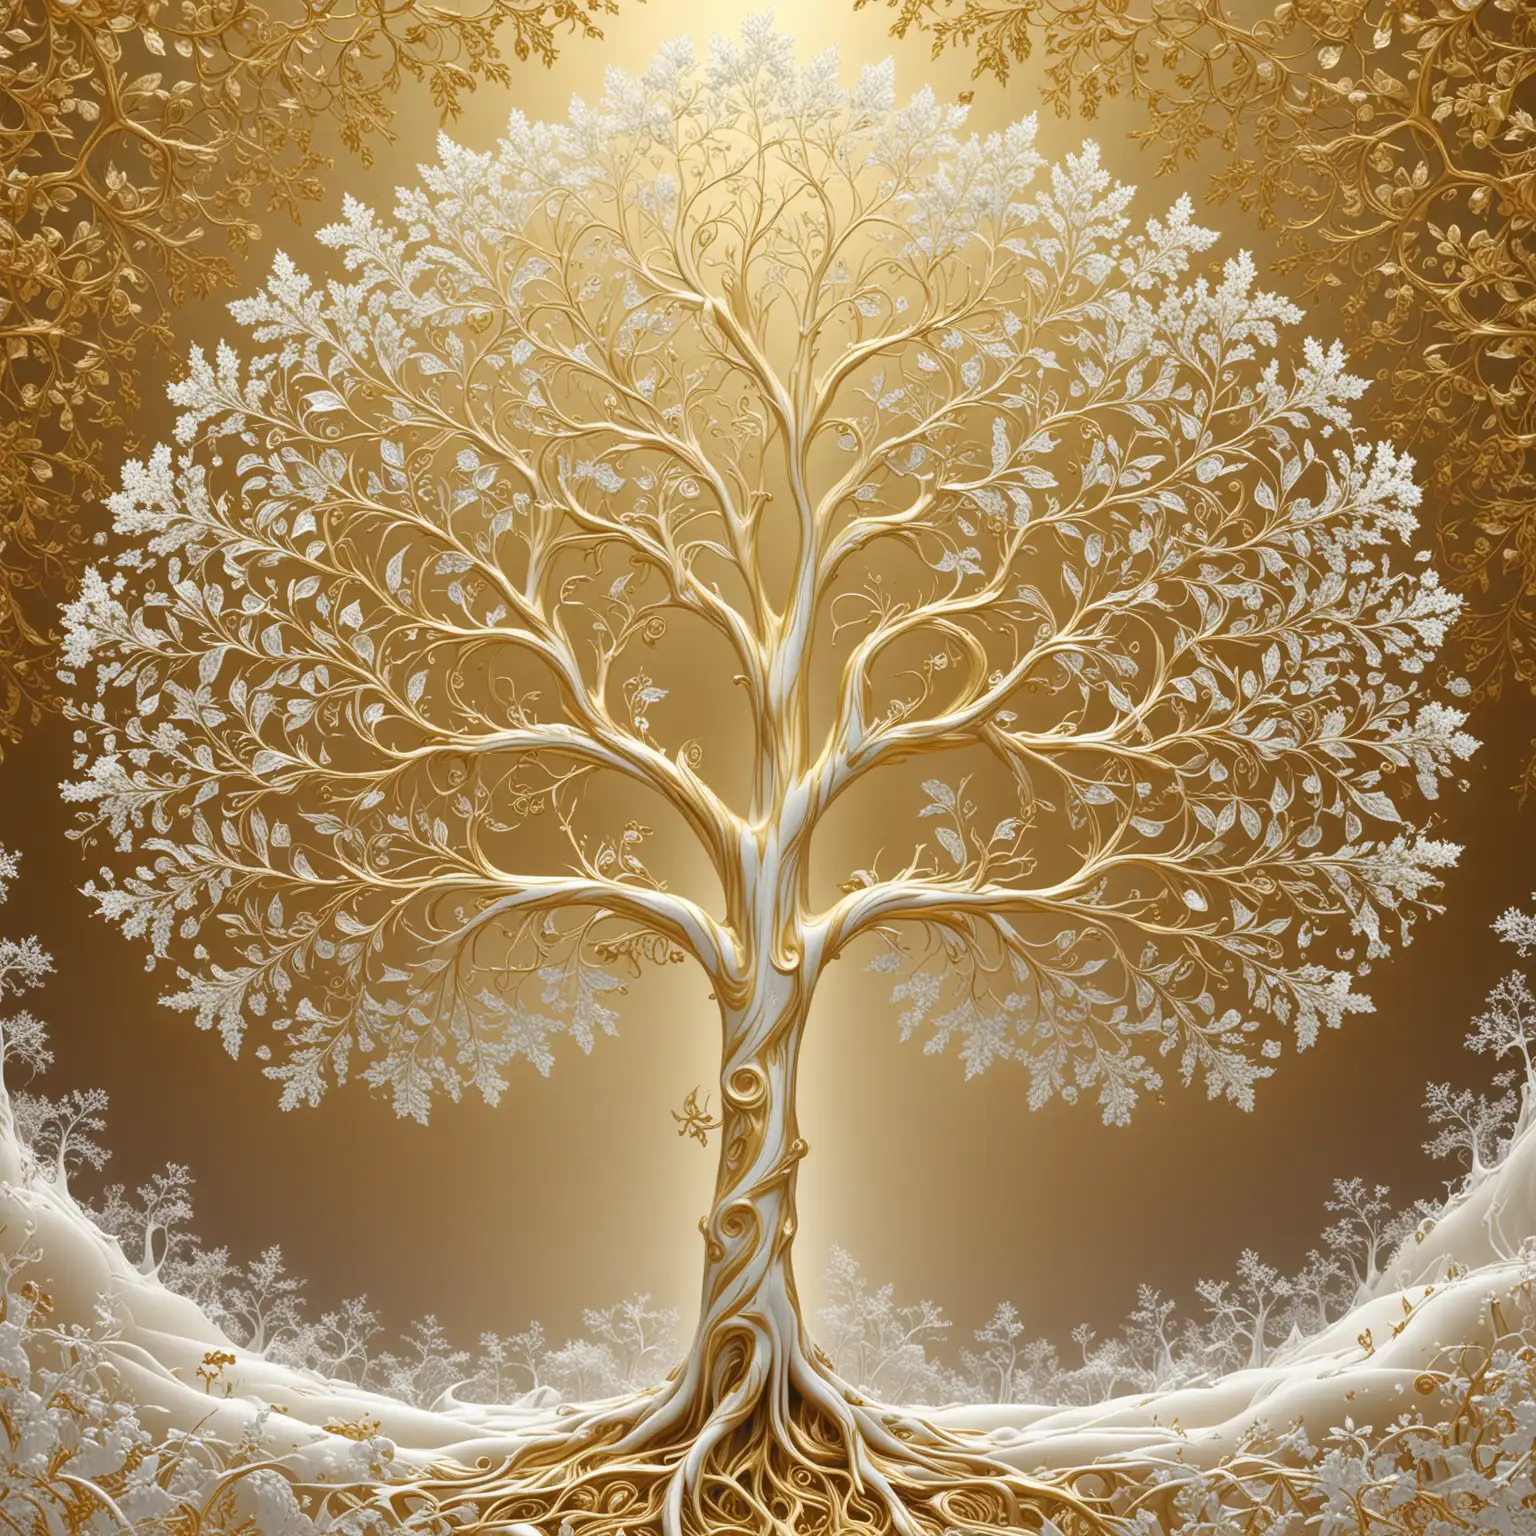 Tree art in lyopanov-fractal style in gold and white